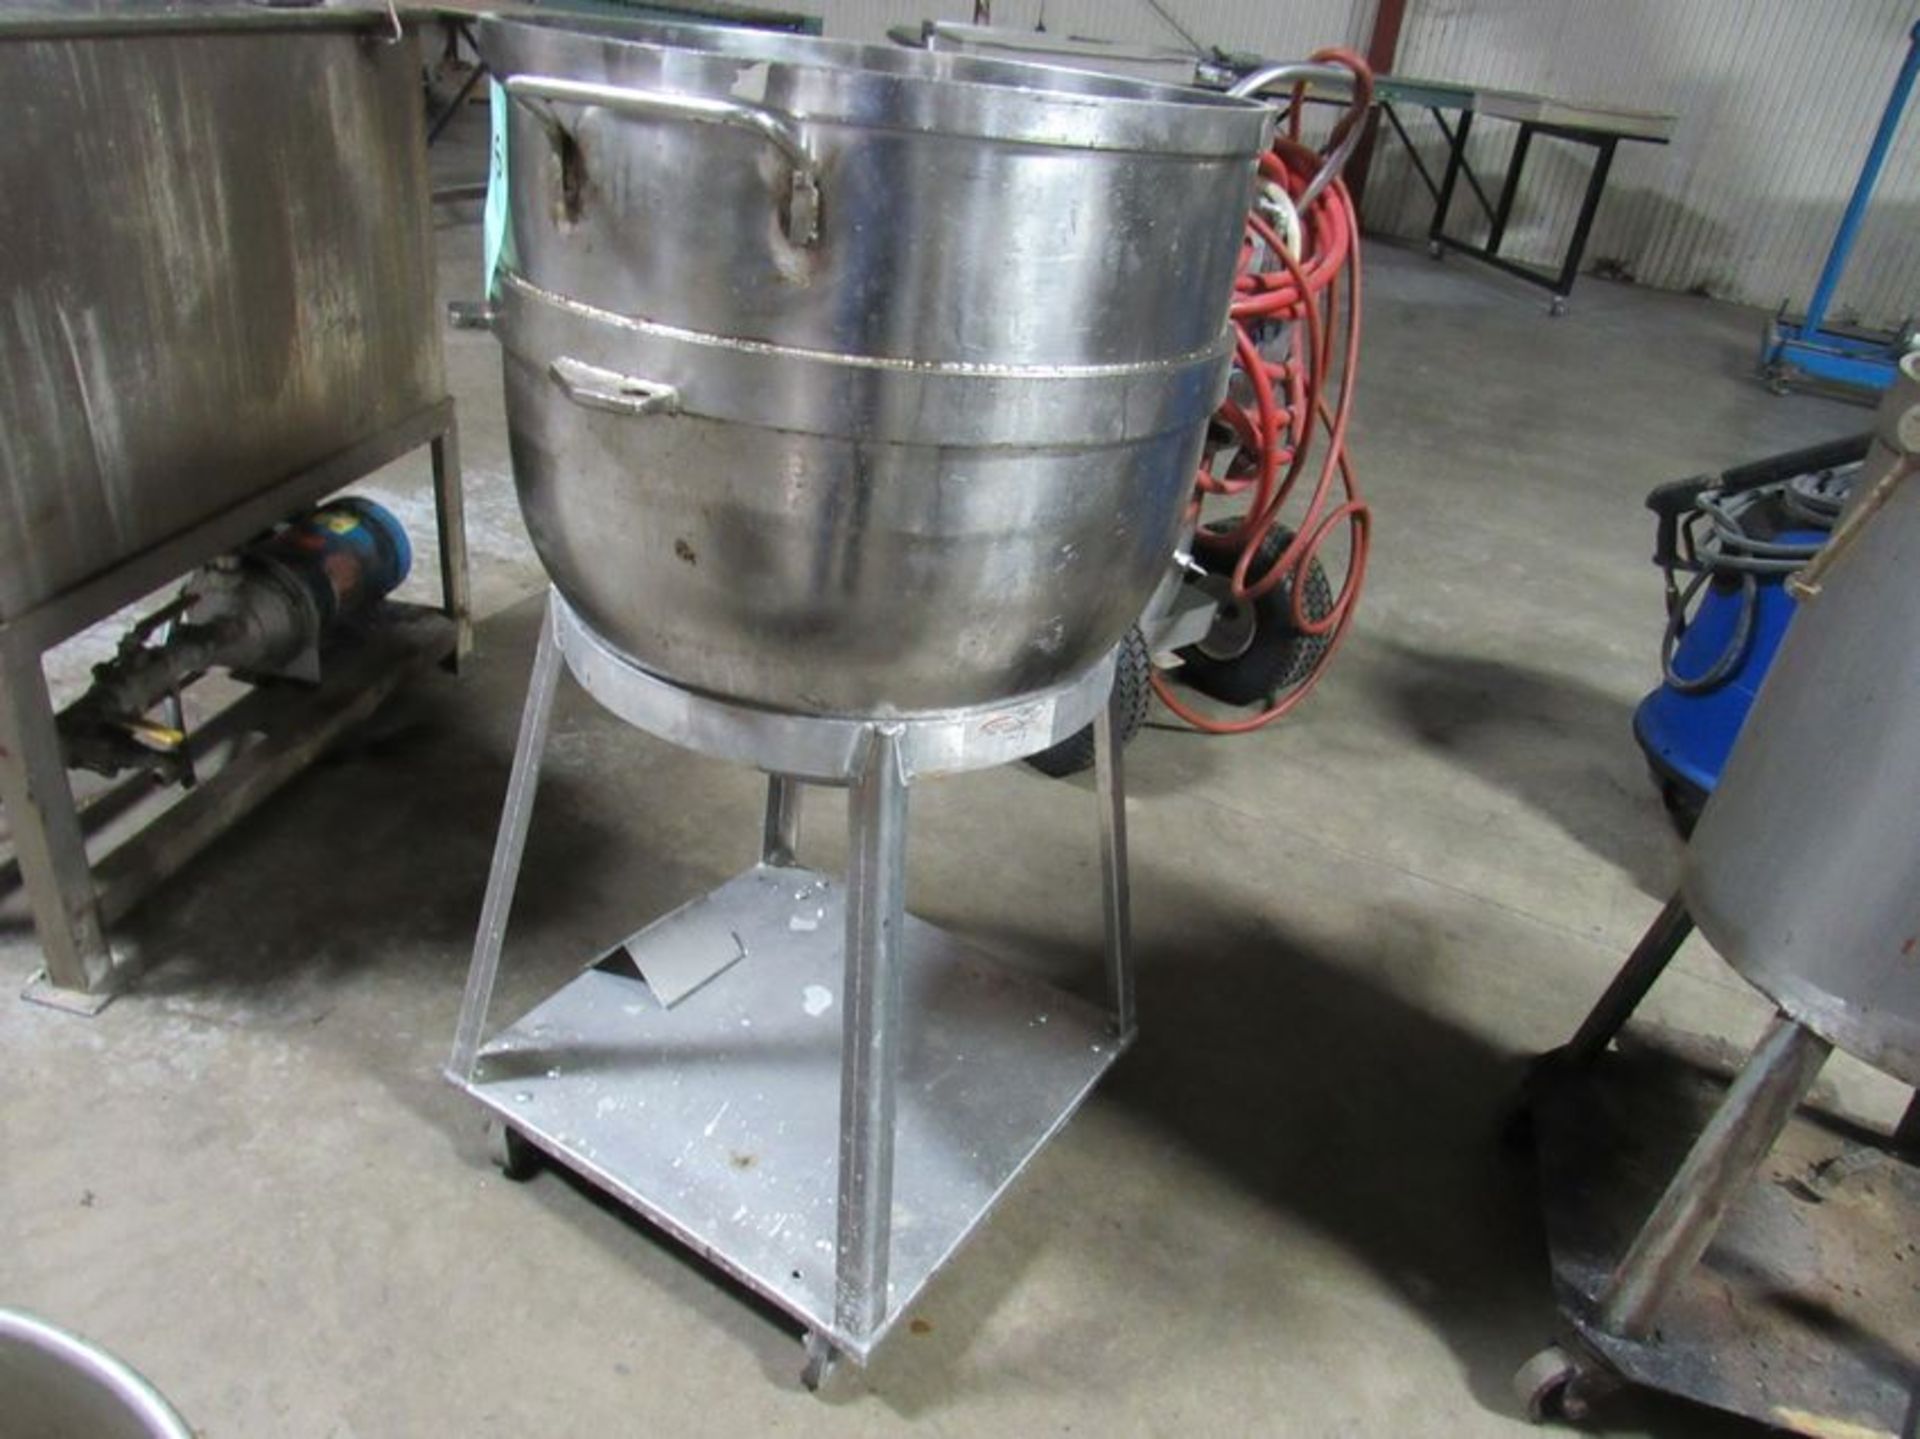 Stainless Steel Bowl and Base on Casters, 19" Diameter, 20" deep - approx. 20 gallons, handles - - Image 5 of 5